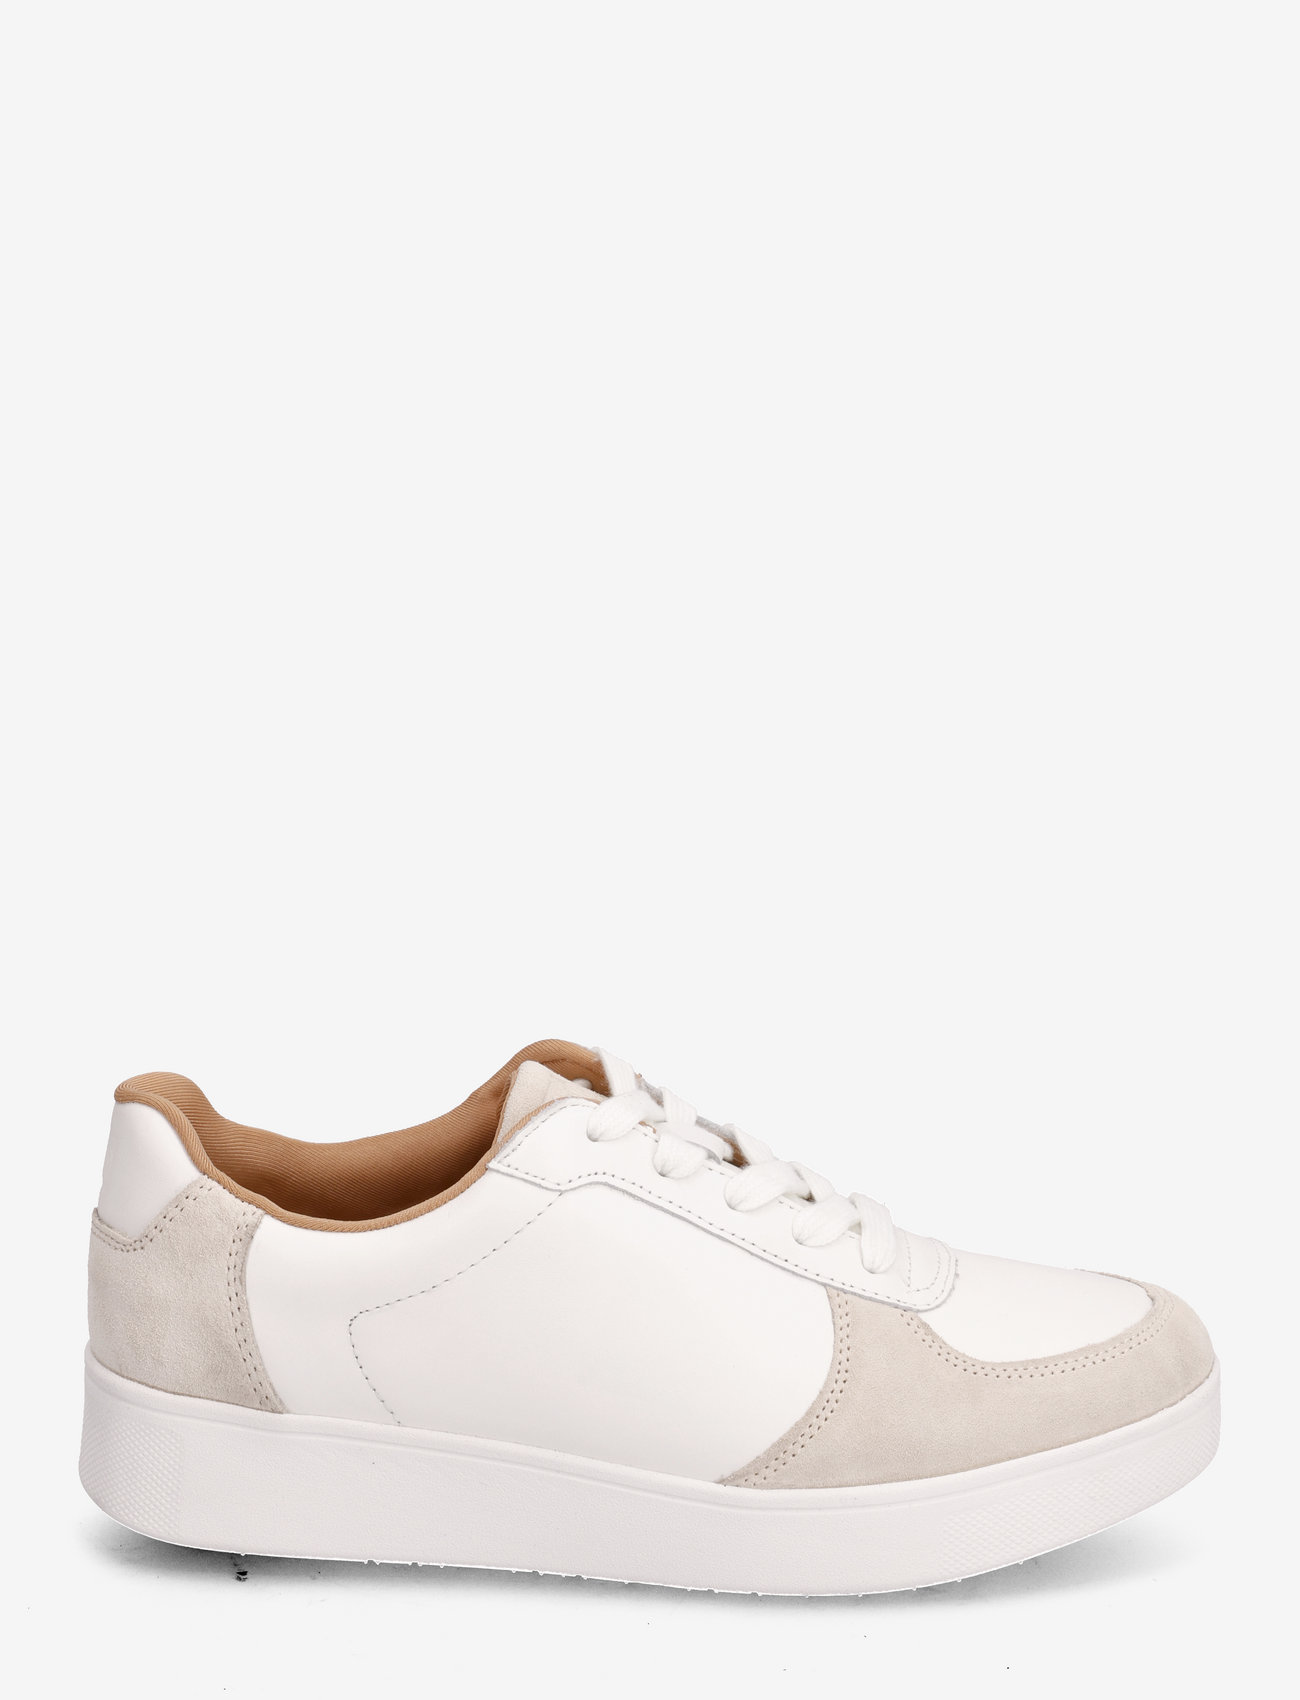 FitFlop - RALLY LEATHER/SUEDE PANEL SNEAKERS - sneakers med lavt skaft - urban white/paris grey - 1